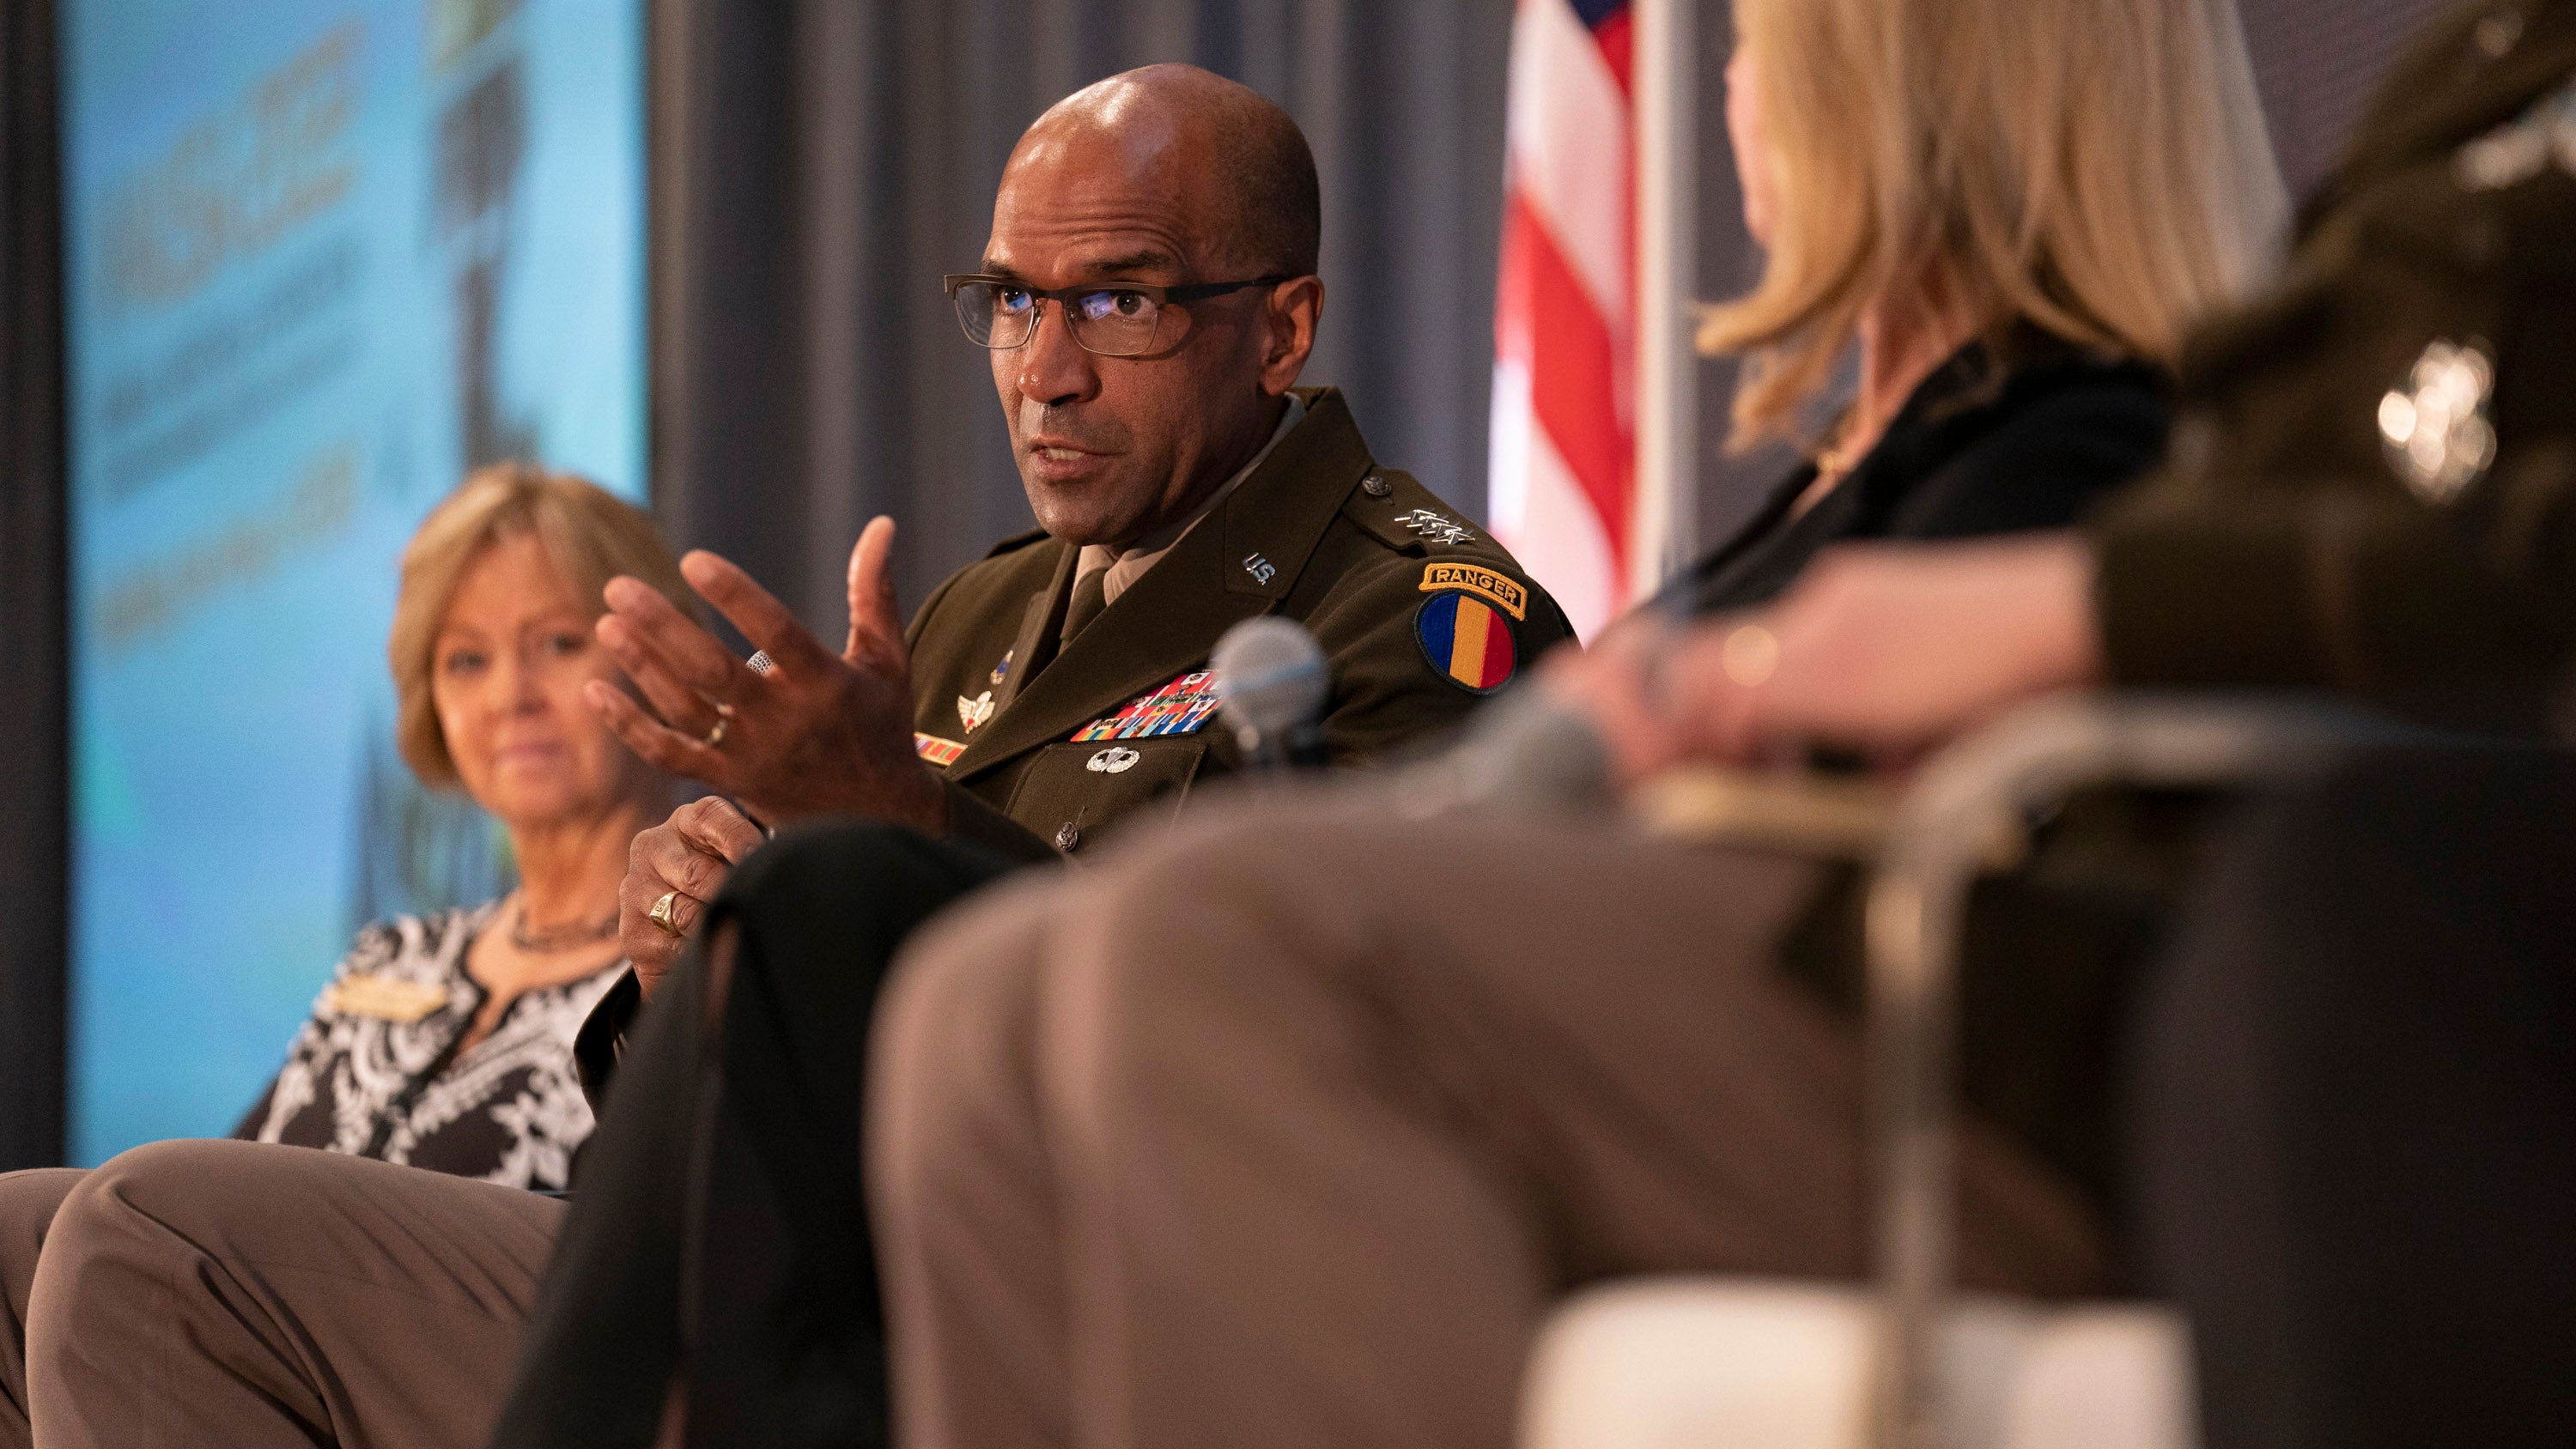 TRADOC commander Gen. Gen. Gary Brito speaks during the AUSA Contemporary Military Forum recruiting session at the AUSA 2022 Annual Meeting in Washington, D.C., Wednesday, Oct. 12, 2022. (Eric Lee for AUSA)